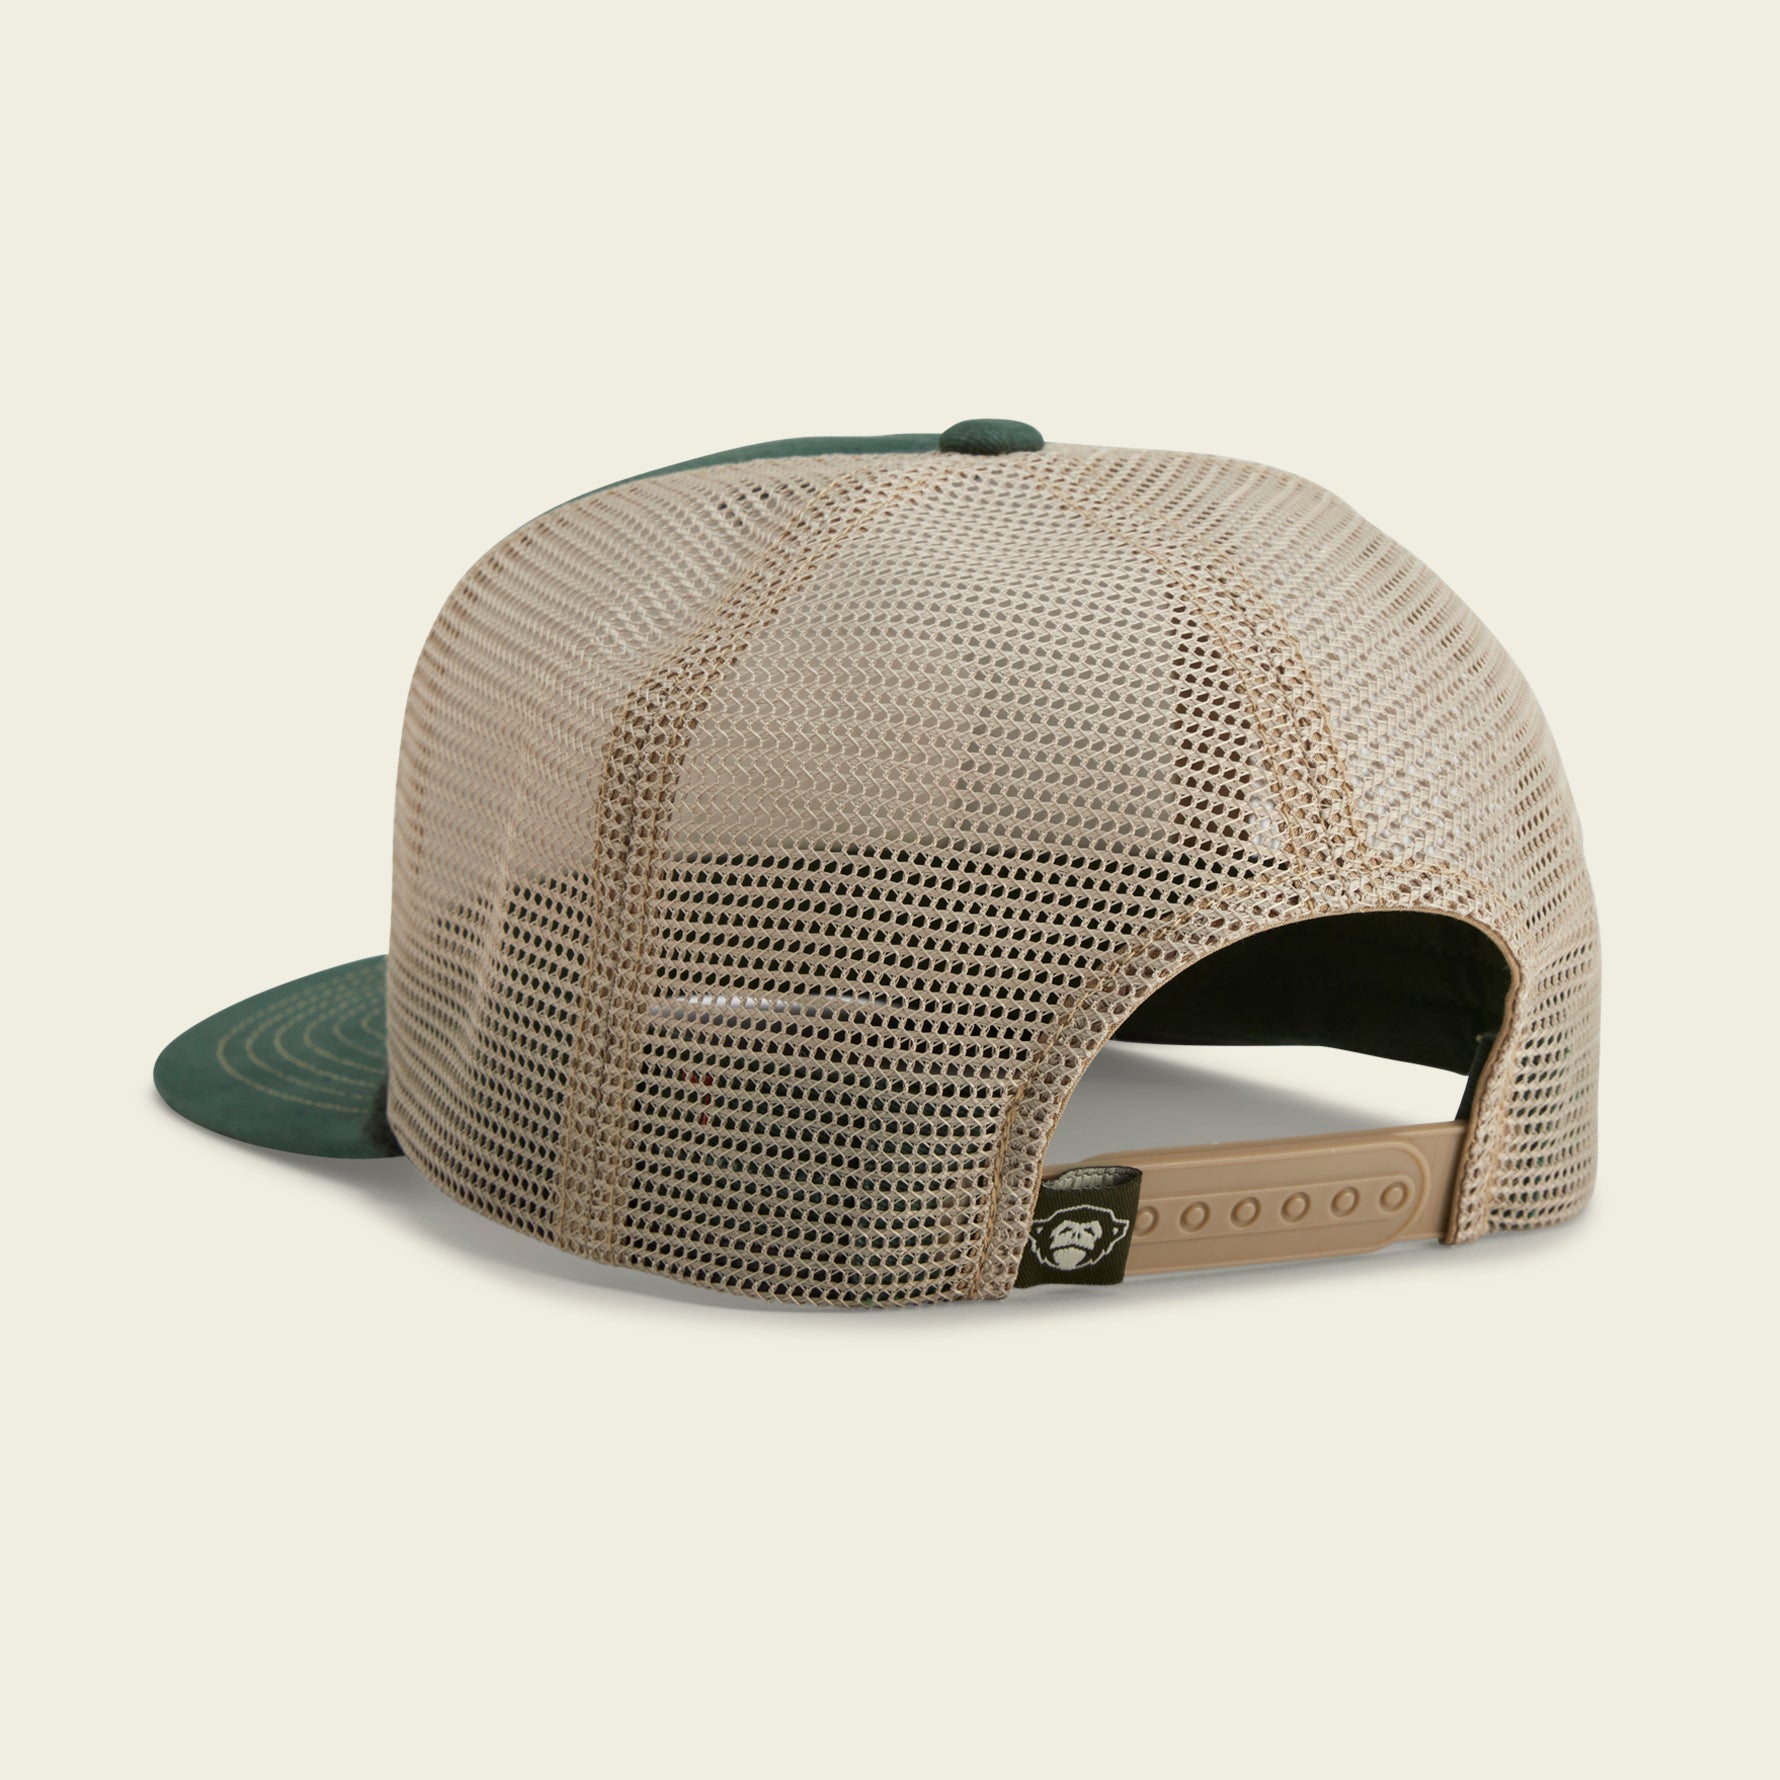 Howler Plantain Snapback - Forest Green